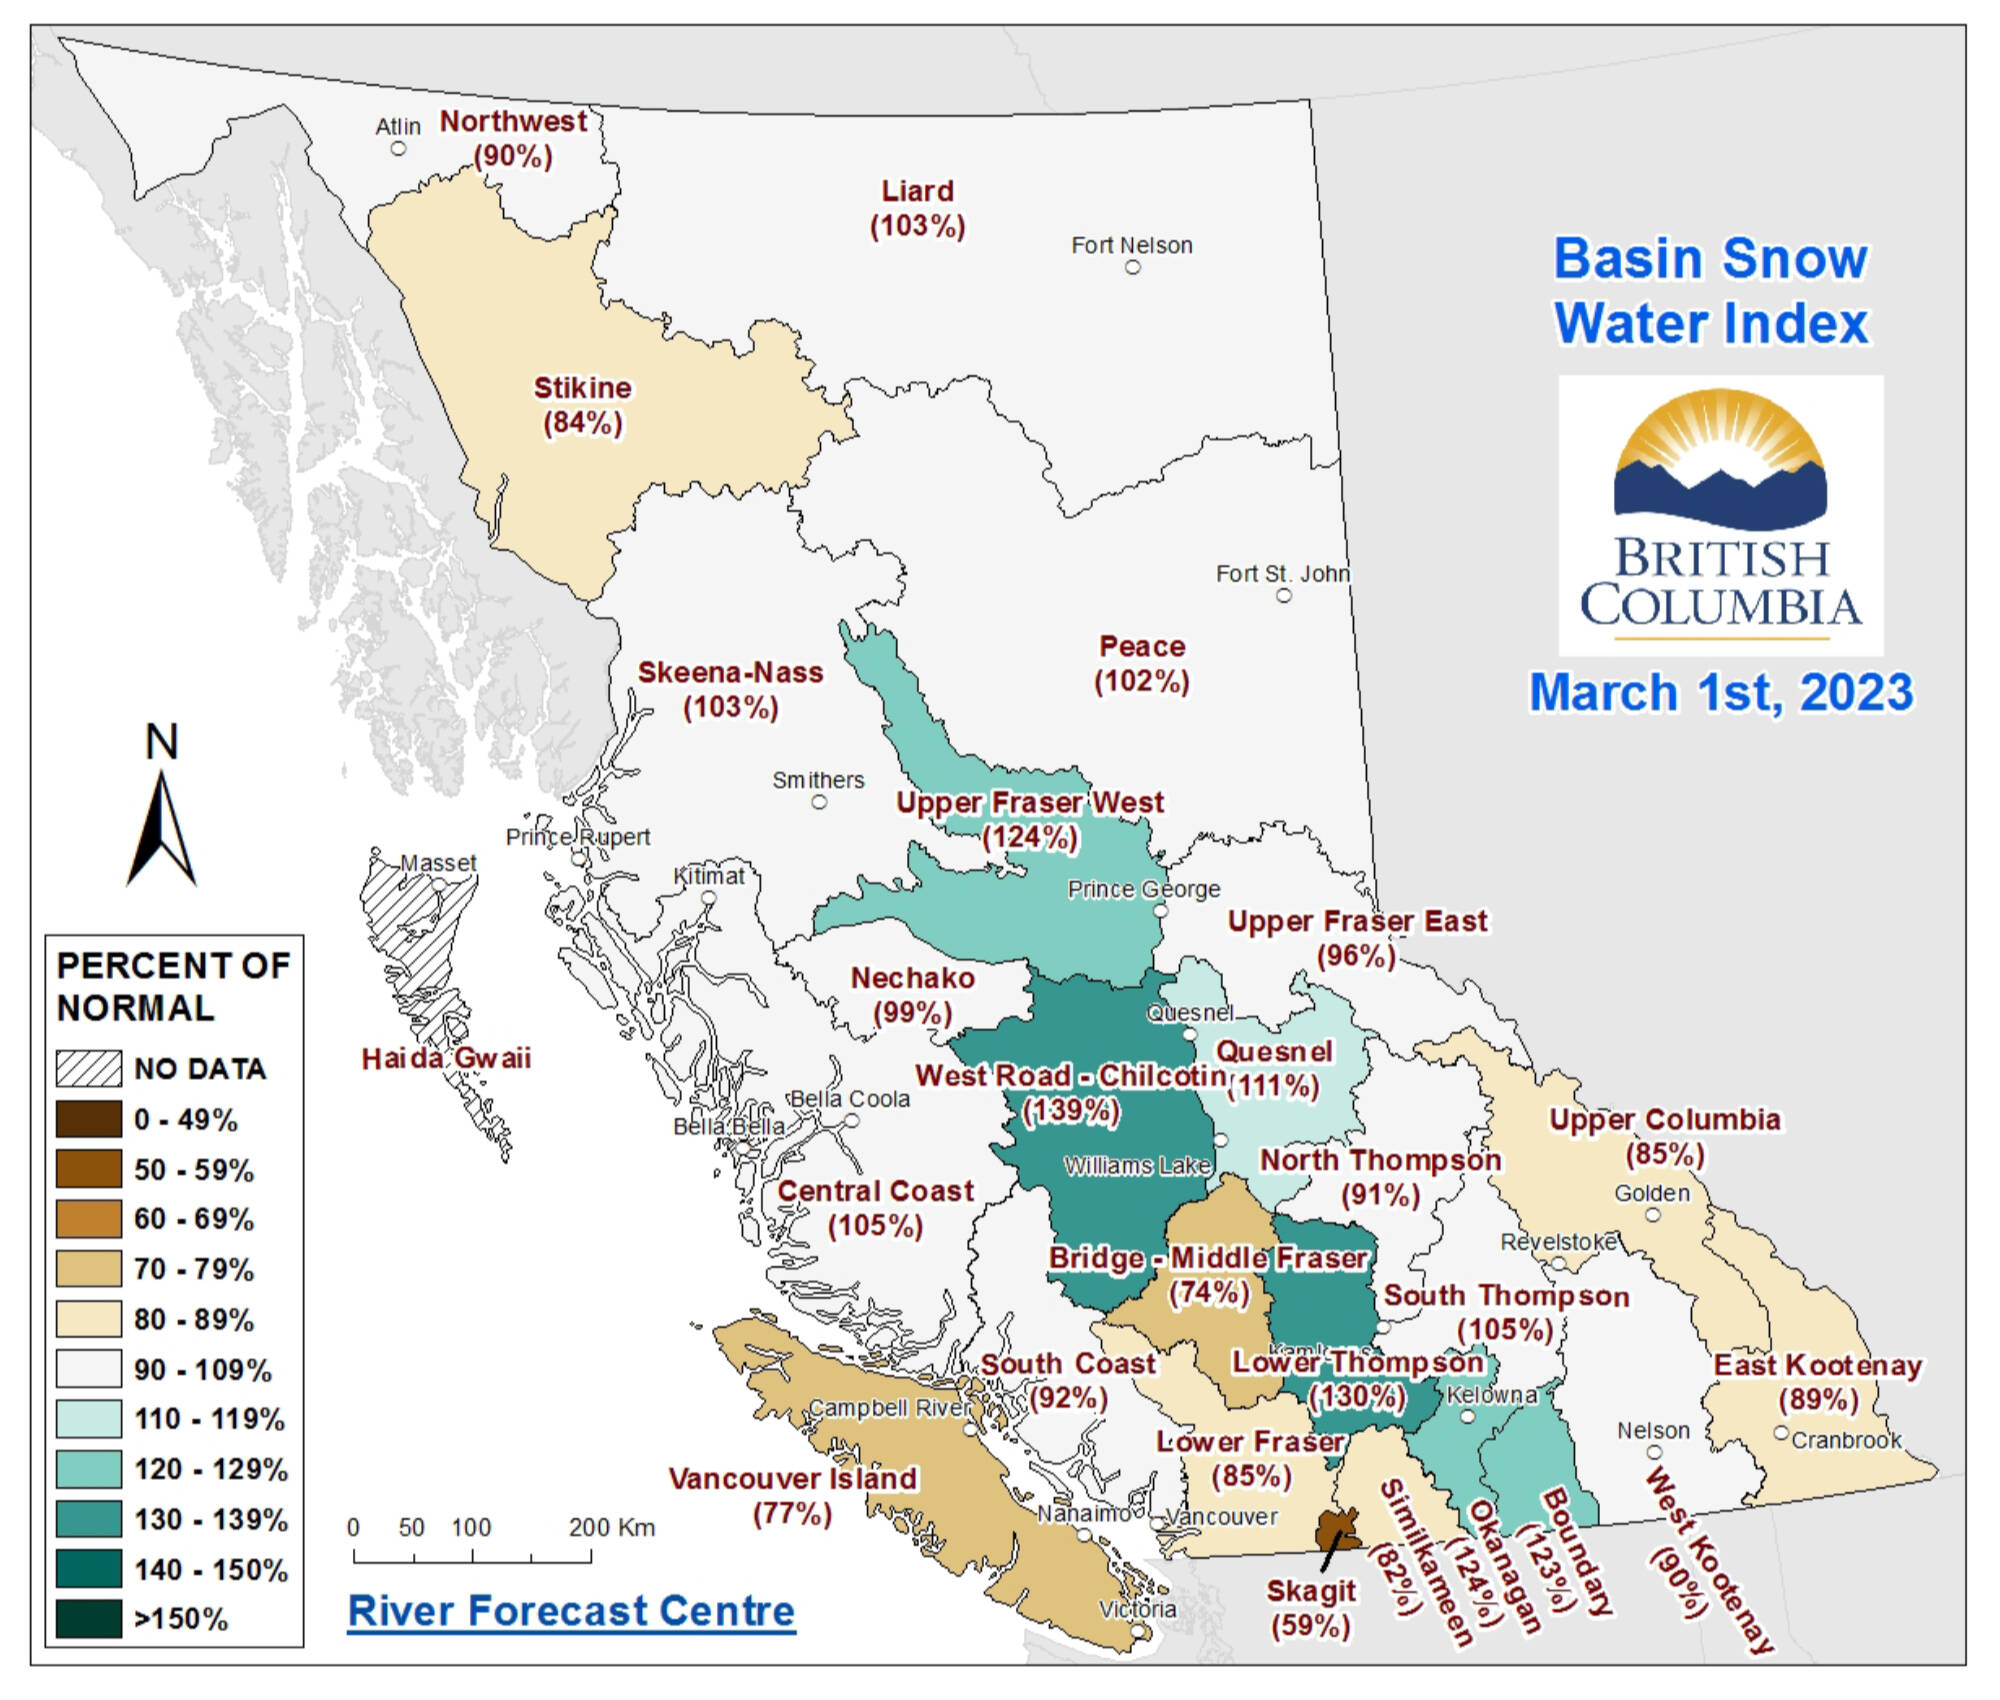 While much of British Columbia had below normal snow levels, the Okanagan, Boundary, Nicola and Upper Fraser West regions had more snow than usual as of March 1, 2023. (BC River Forecast Centre image)